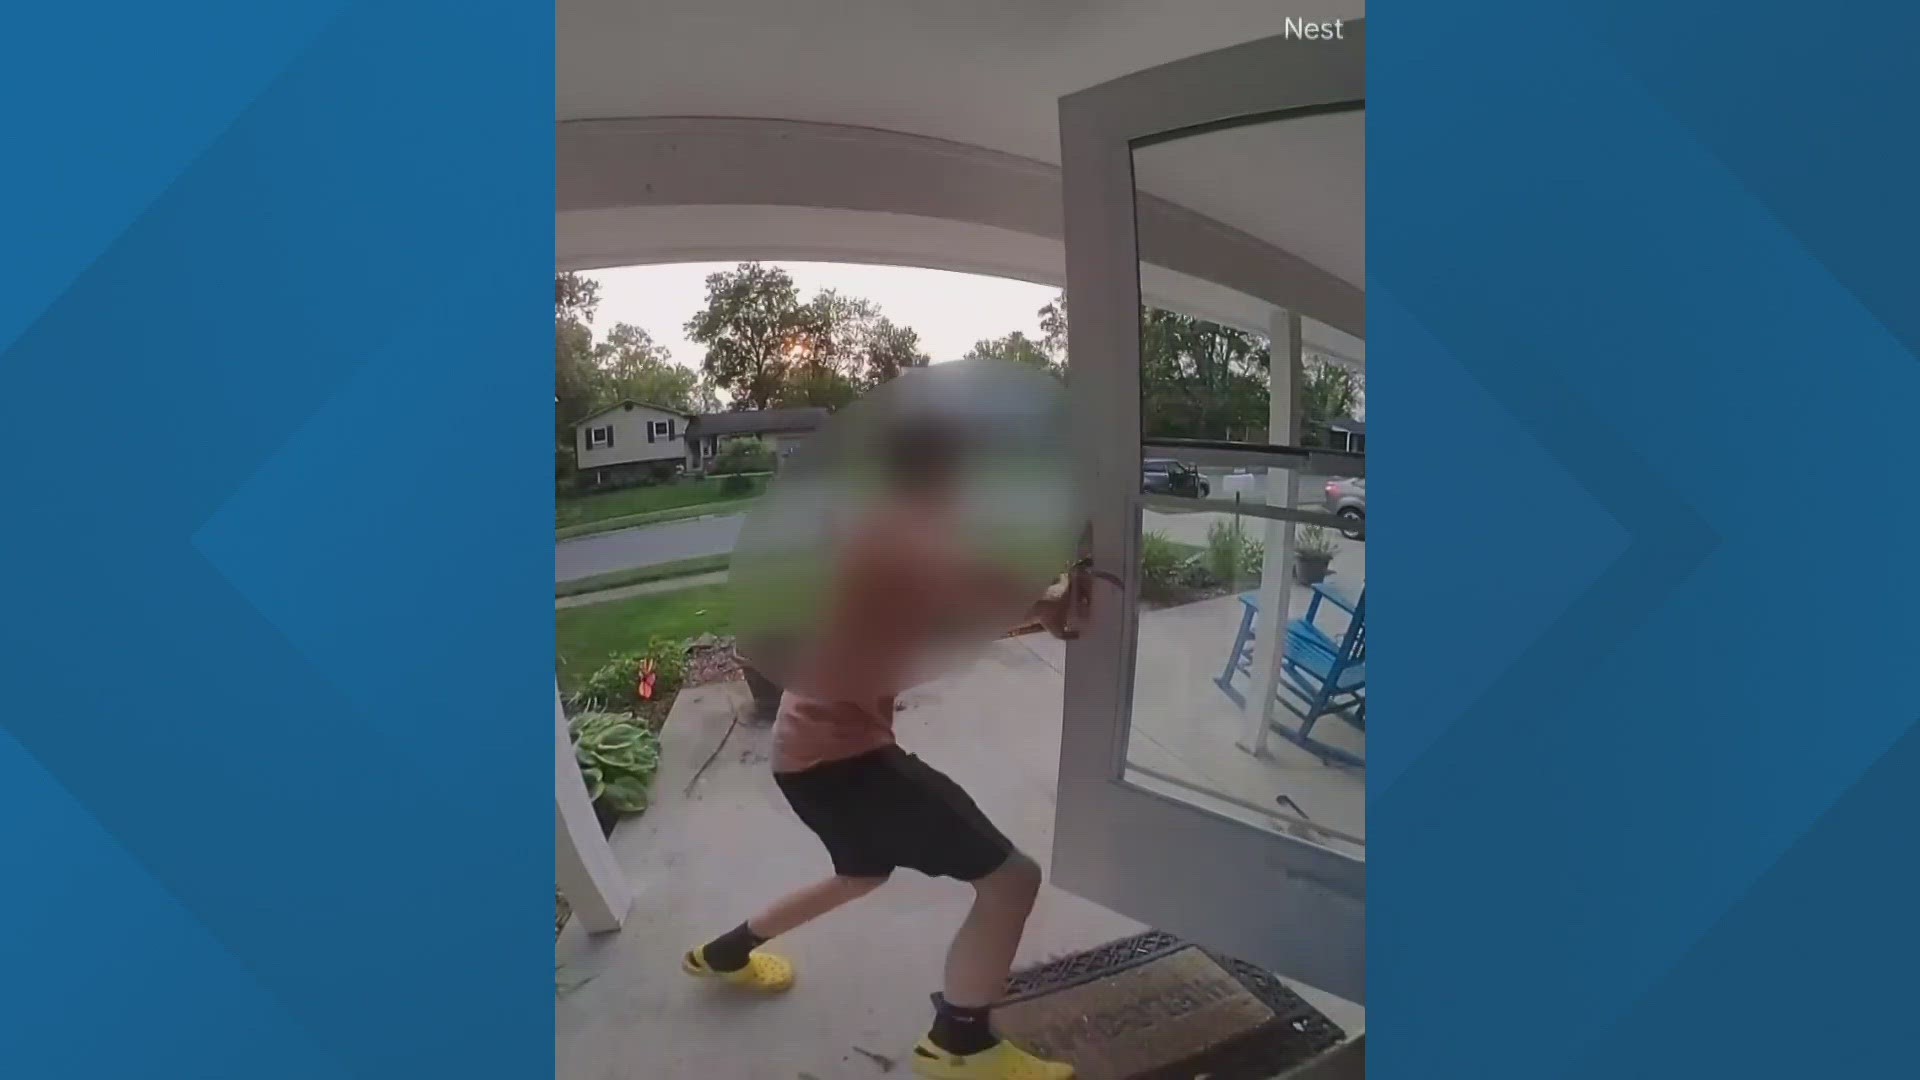 Video shows one teenager running up to someone's home, kicking the door and running away.